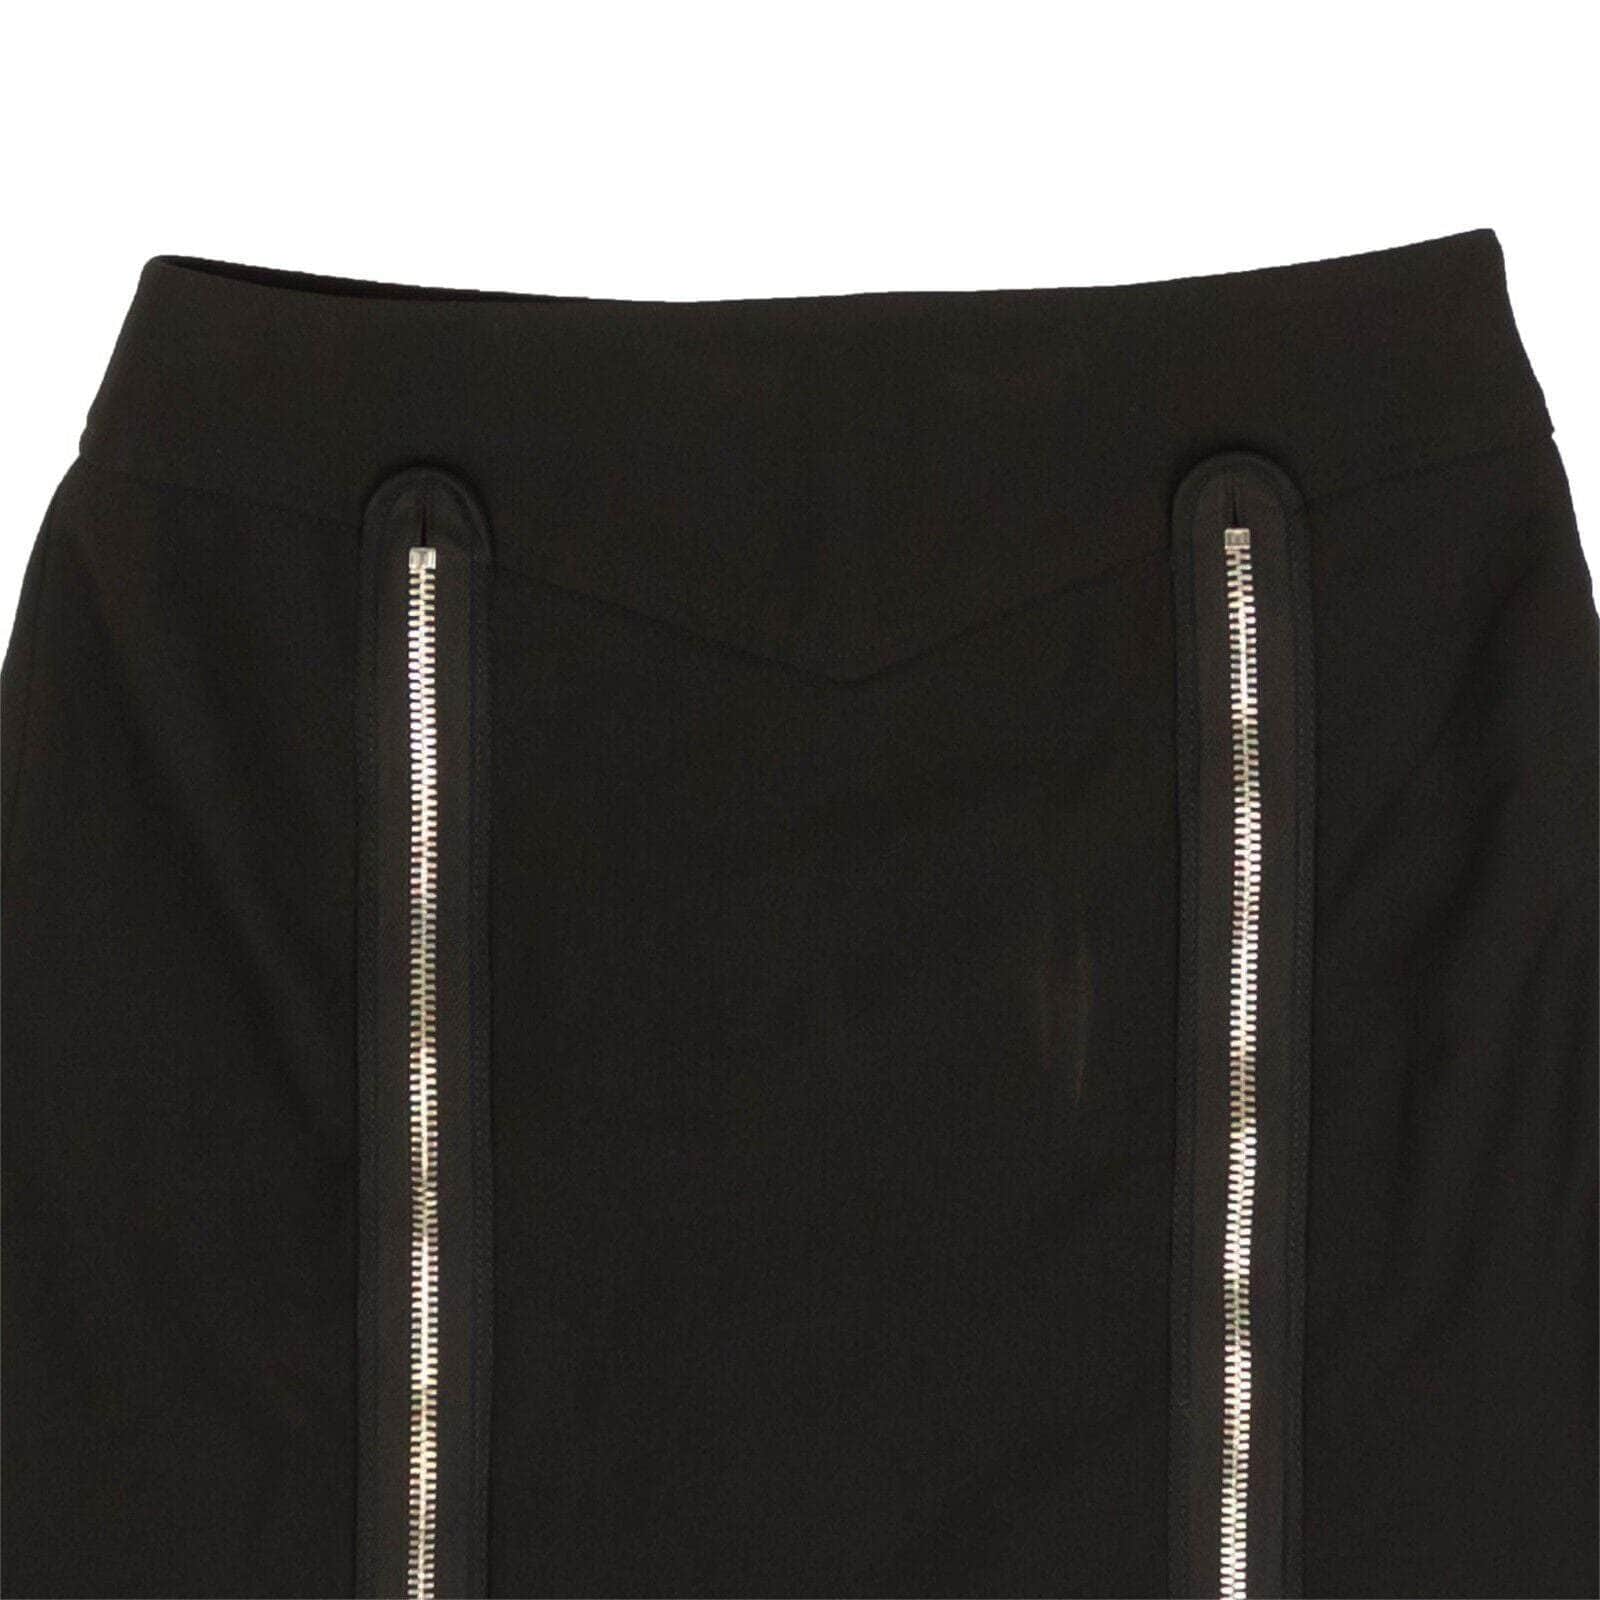 Palm Angels 250-500, channelenable-all, chicmi, couponcollection, gender-womens, main-clothing, palm-angels, size-40 40 Black Zipper Pleat Miniskirt 82NGG-PA-1405/40 82NGG-PA-1405/40